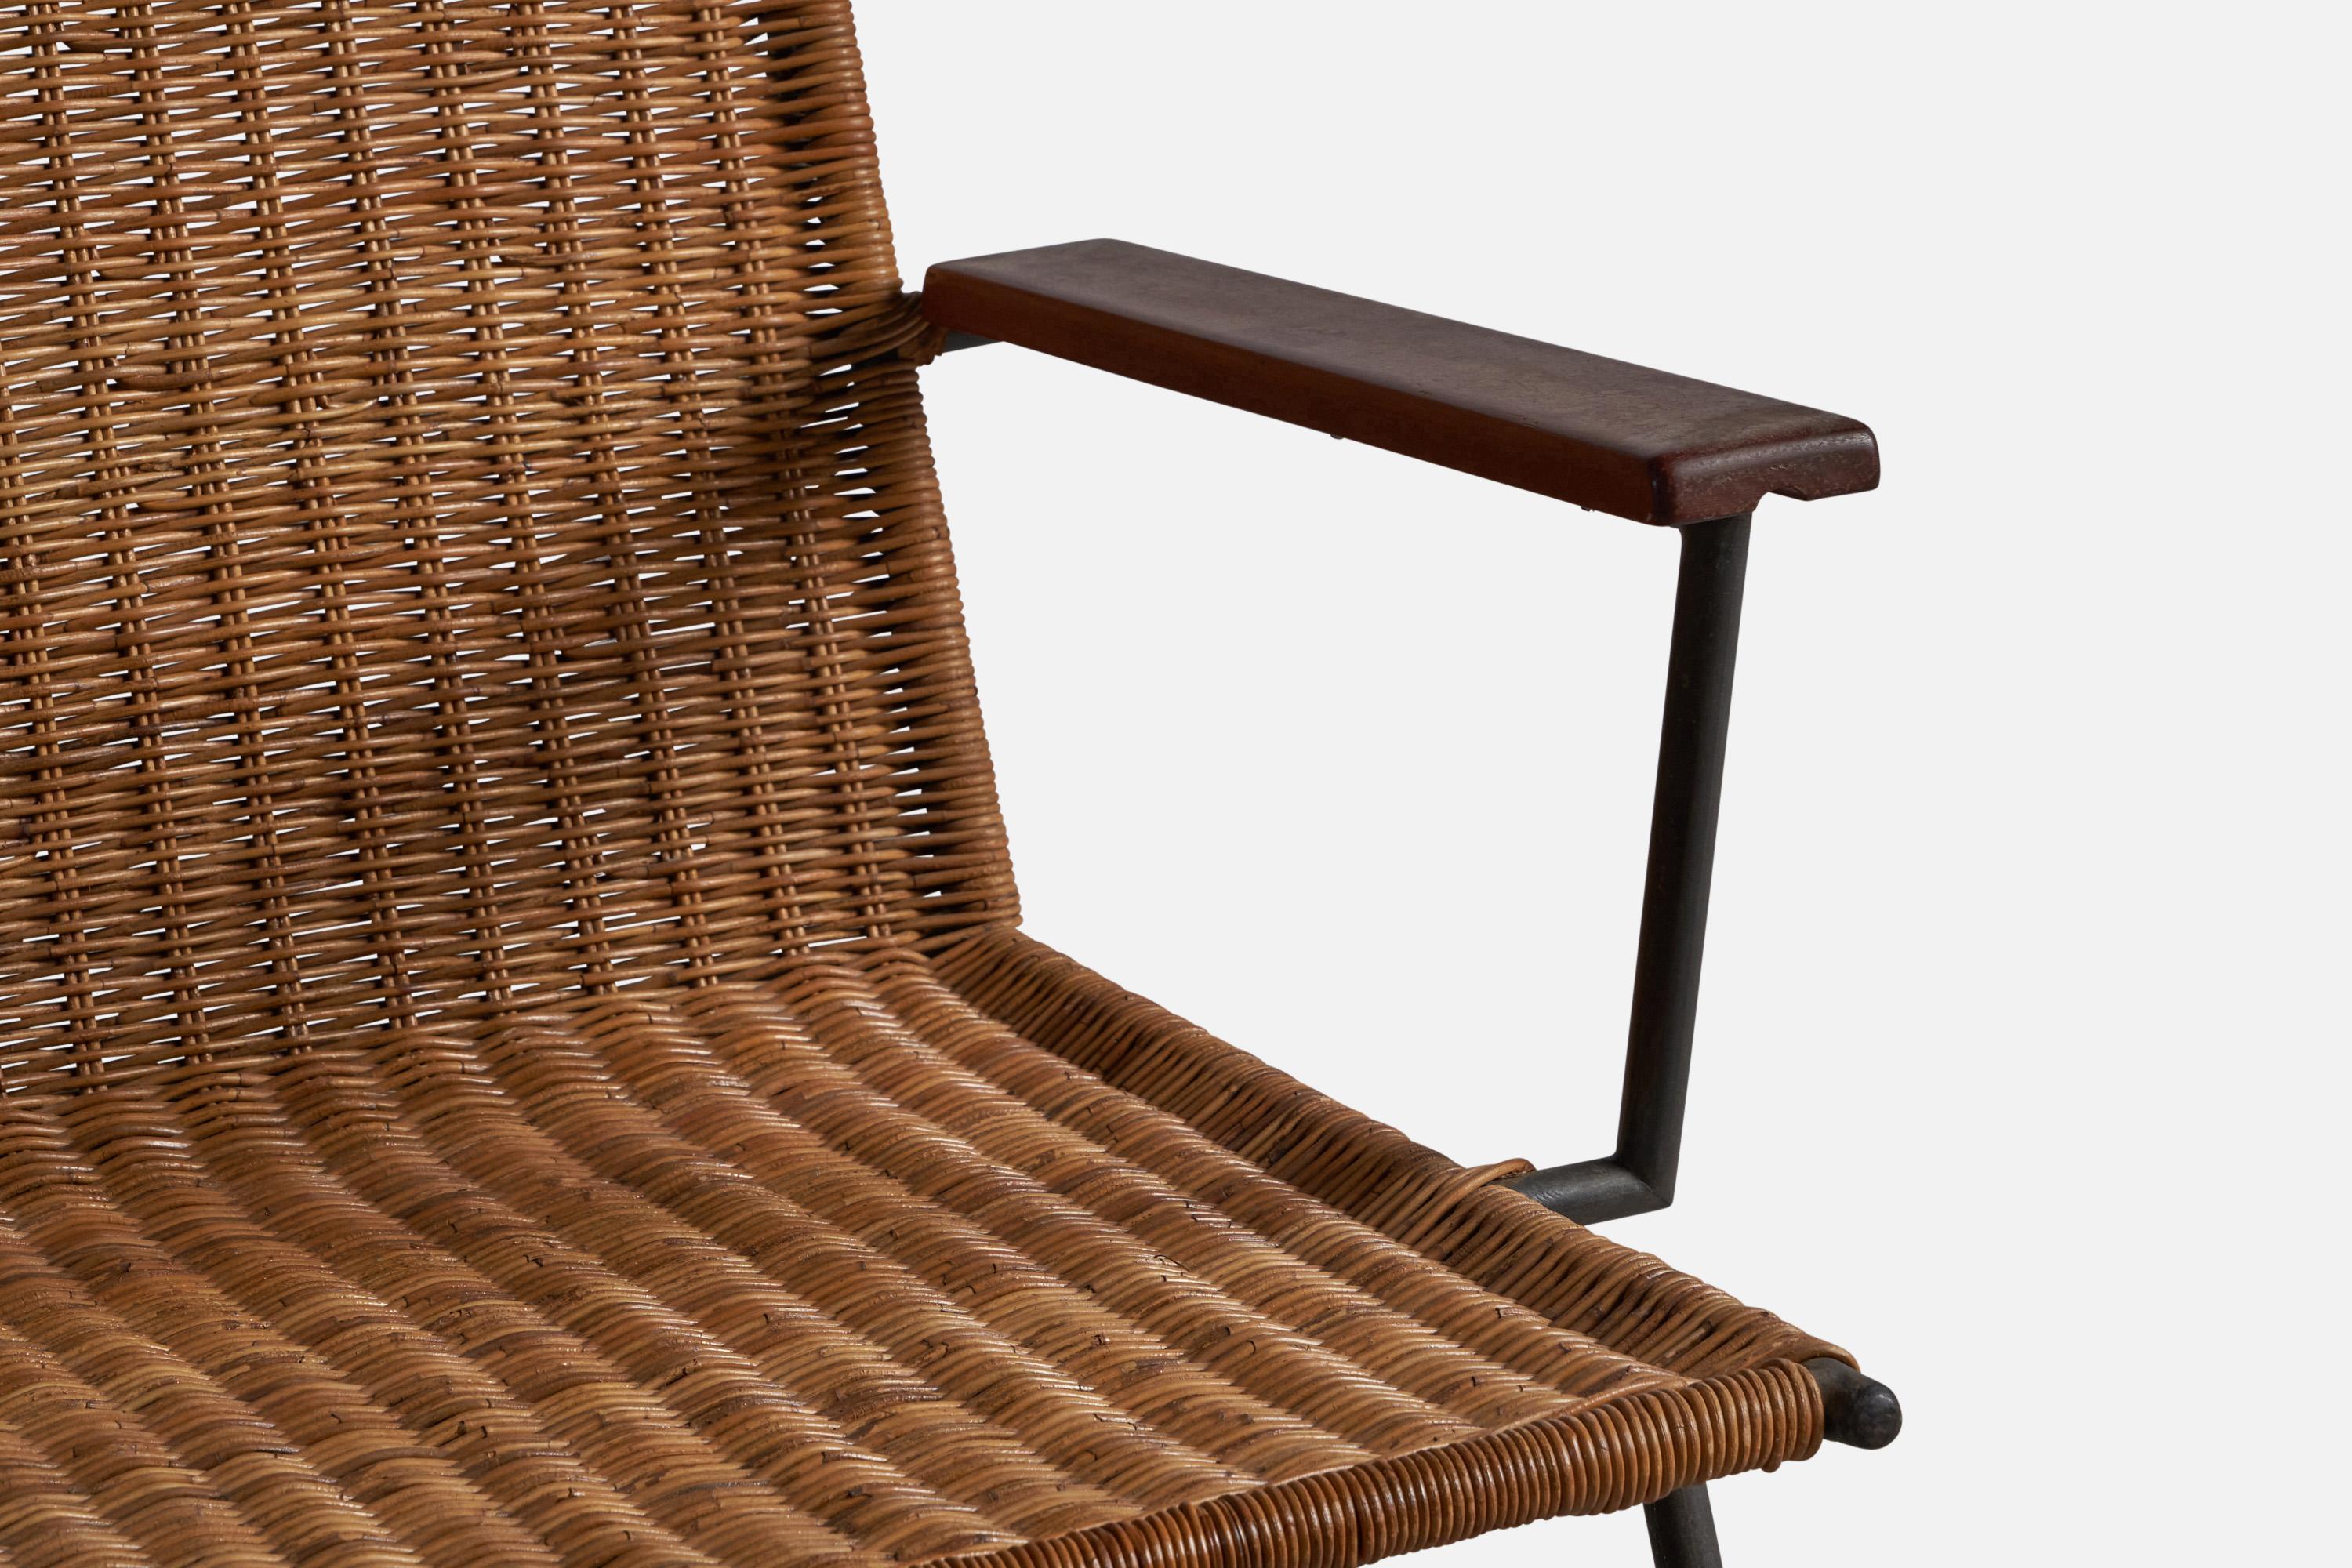 American Designer, Lounge Chair, Cane, Wood, Metal, USA, 1950s For Sale 2